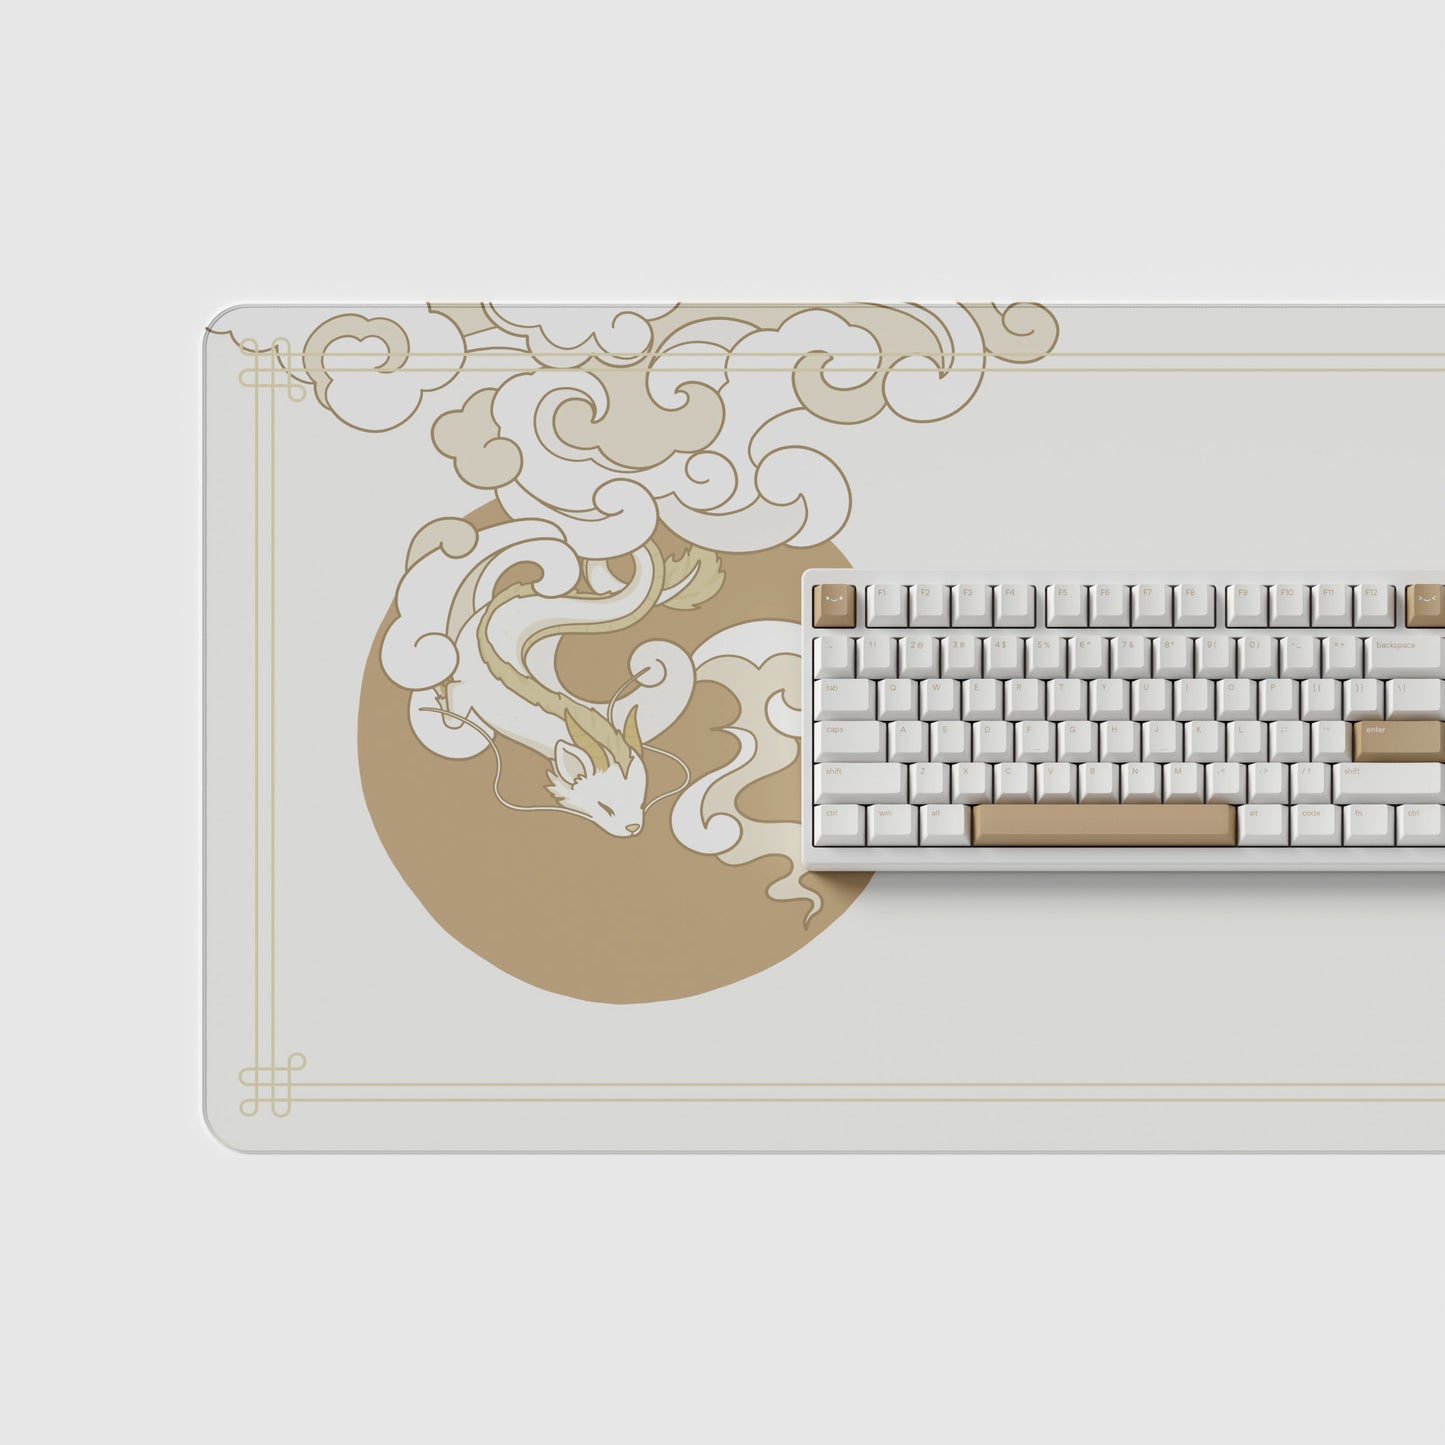 year of the dragon keycaps